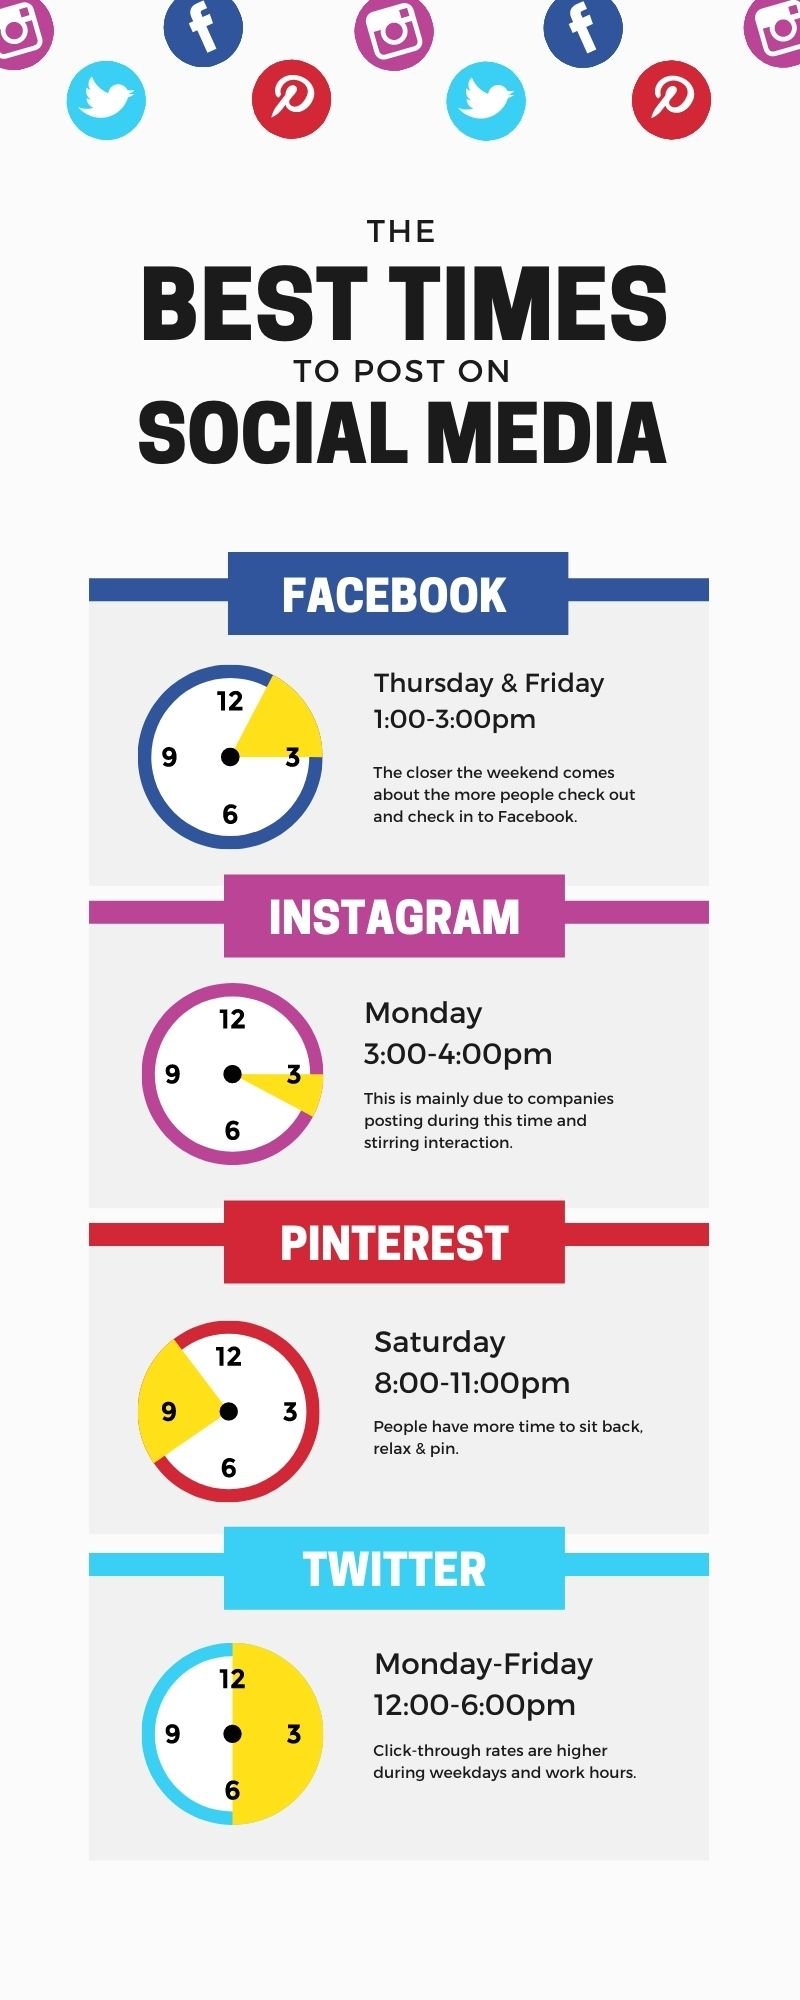 The best times to post on social media.